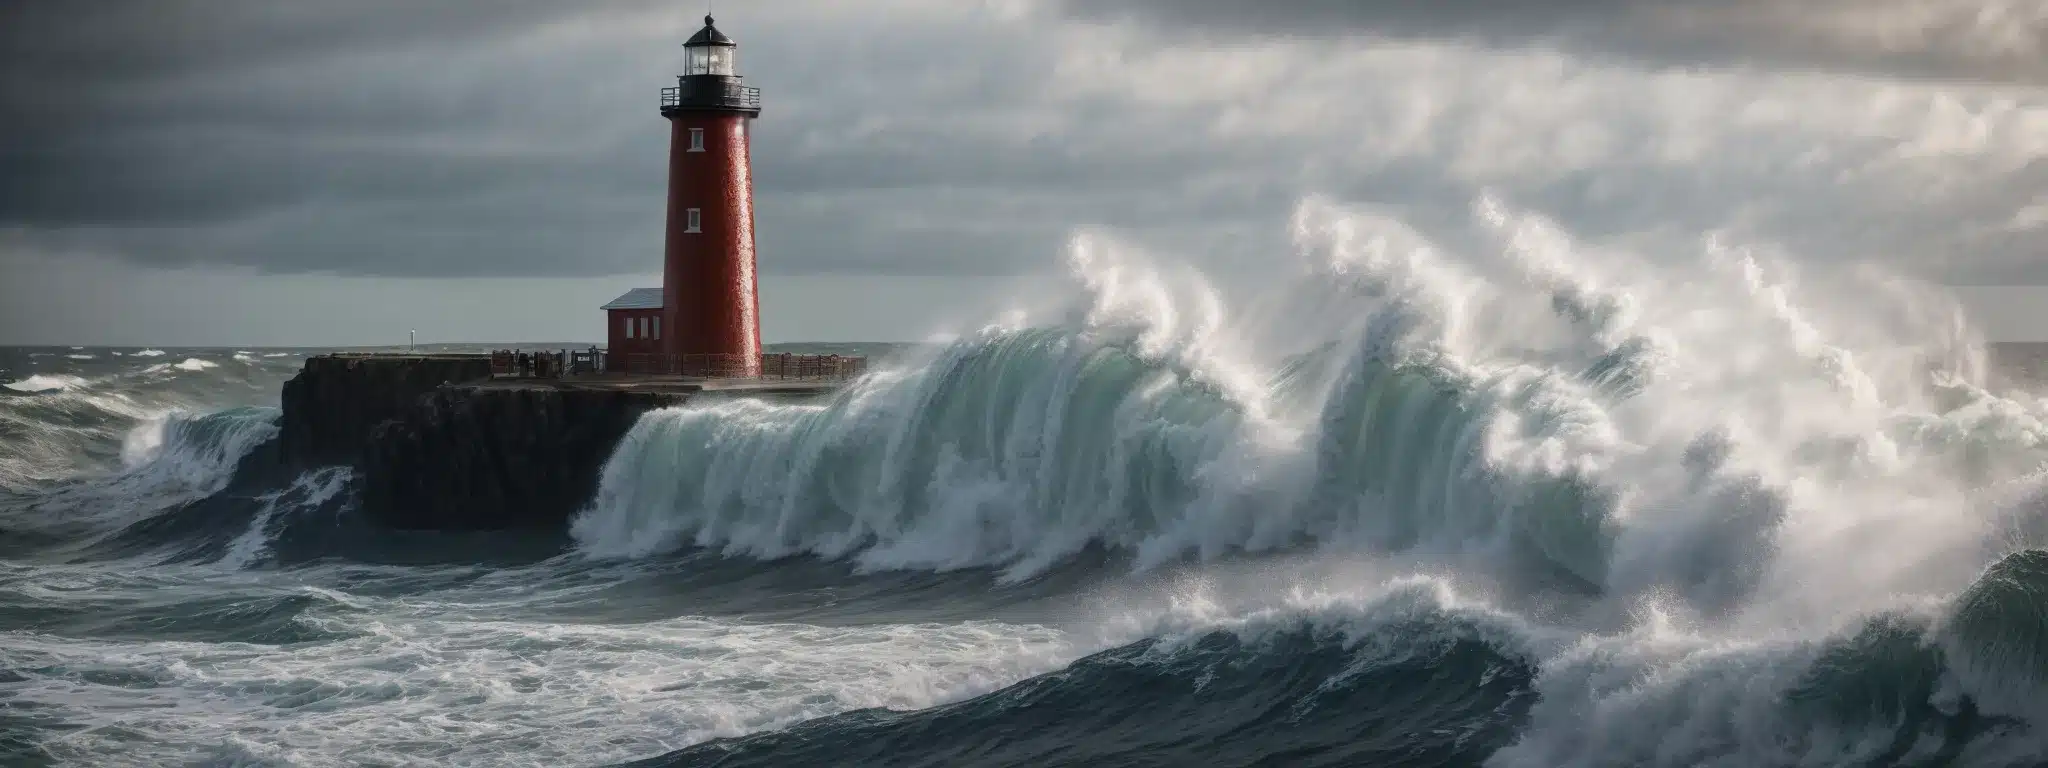 A Lighthouse Standing Firm Amidst Tumultuous Ocean Waves.